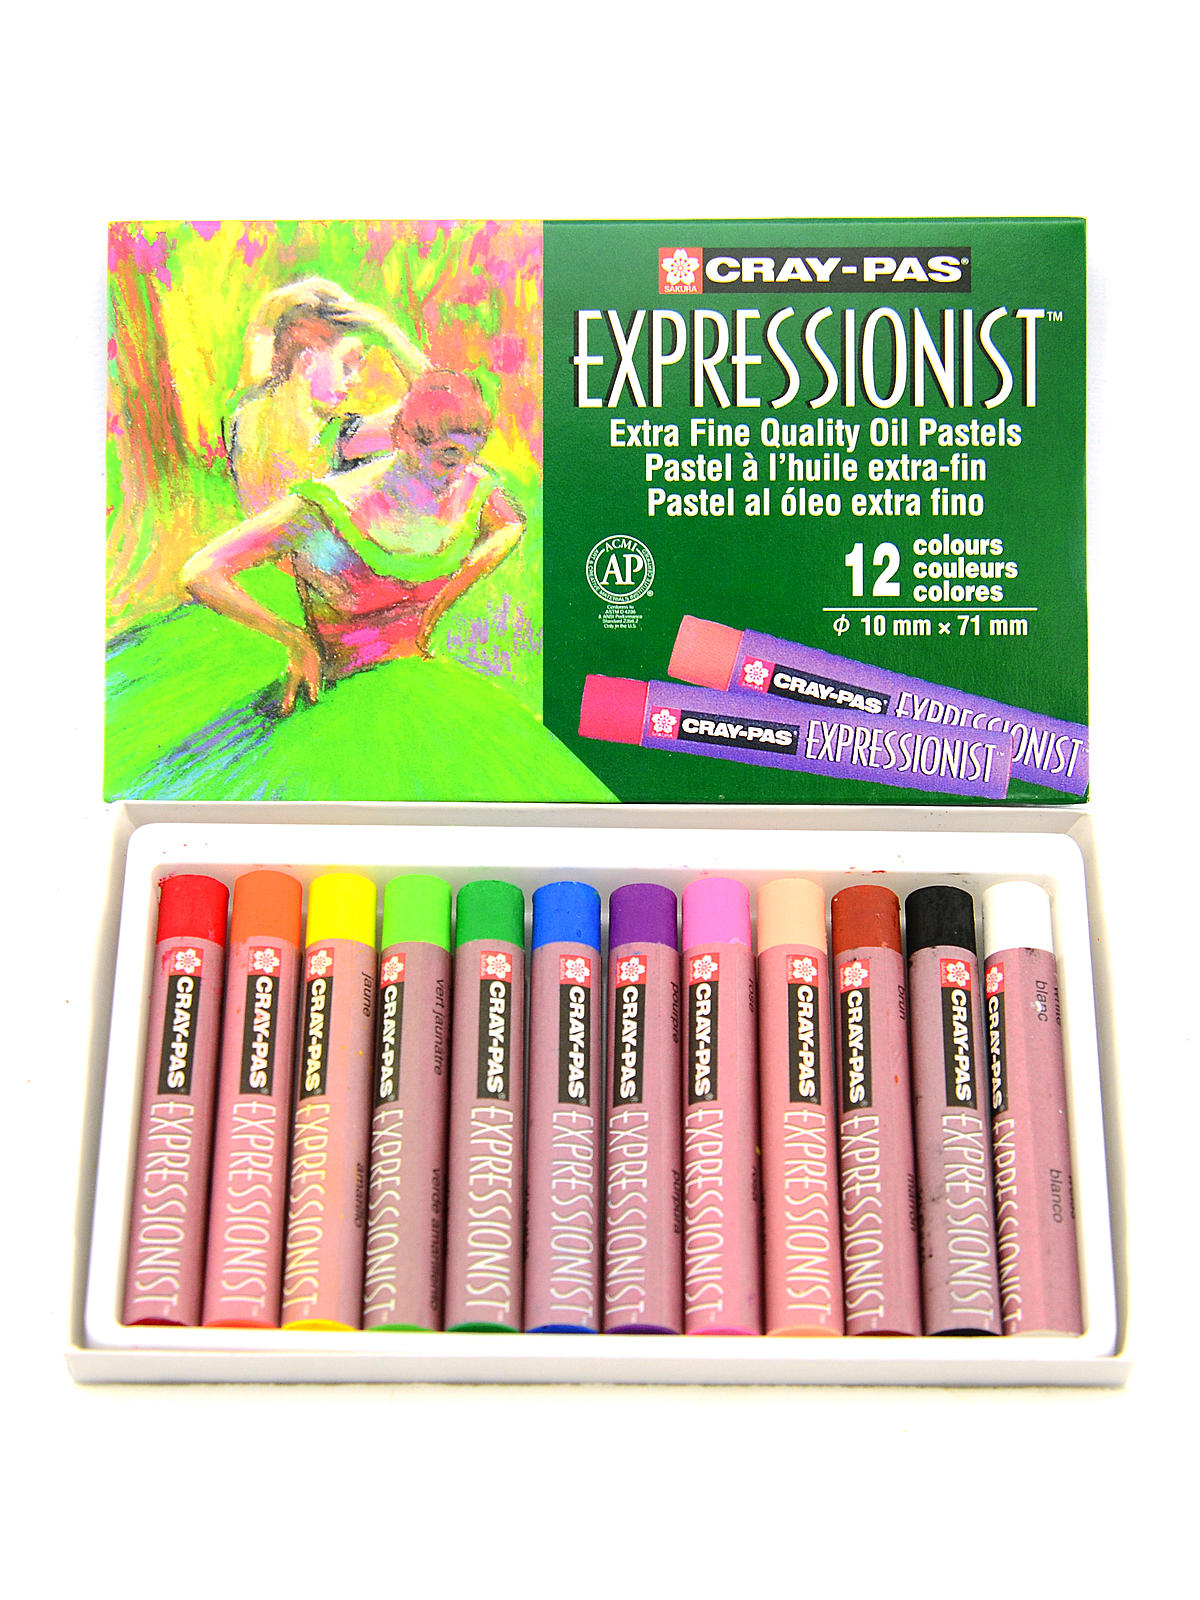 Cray-pas Expressionist Oil Pastels Assortment Set Of 12